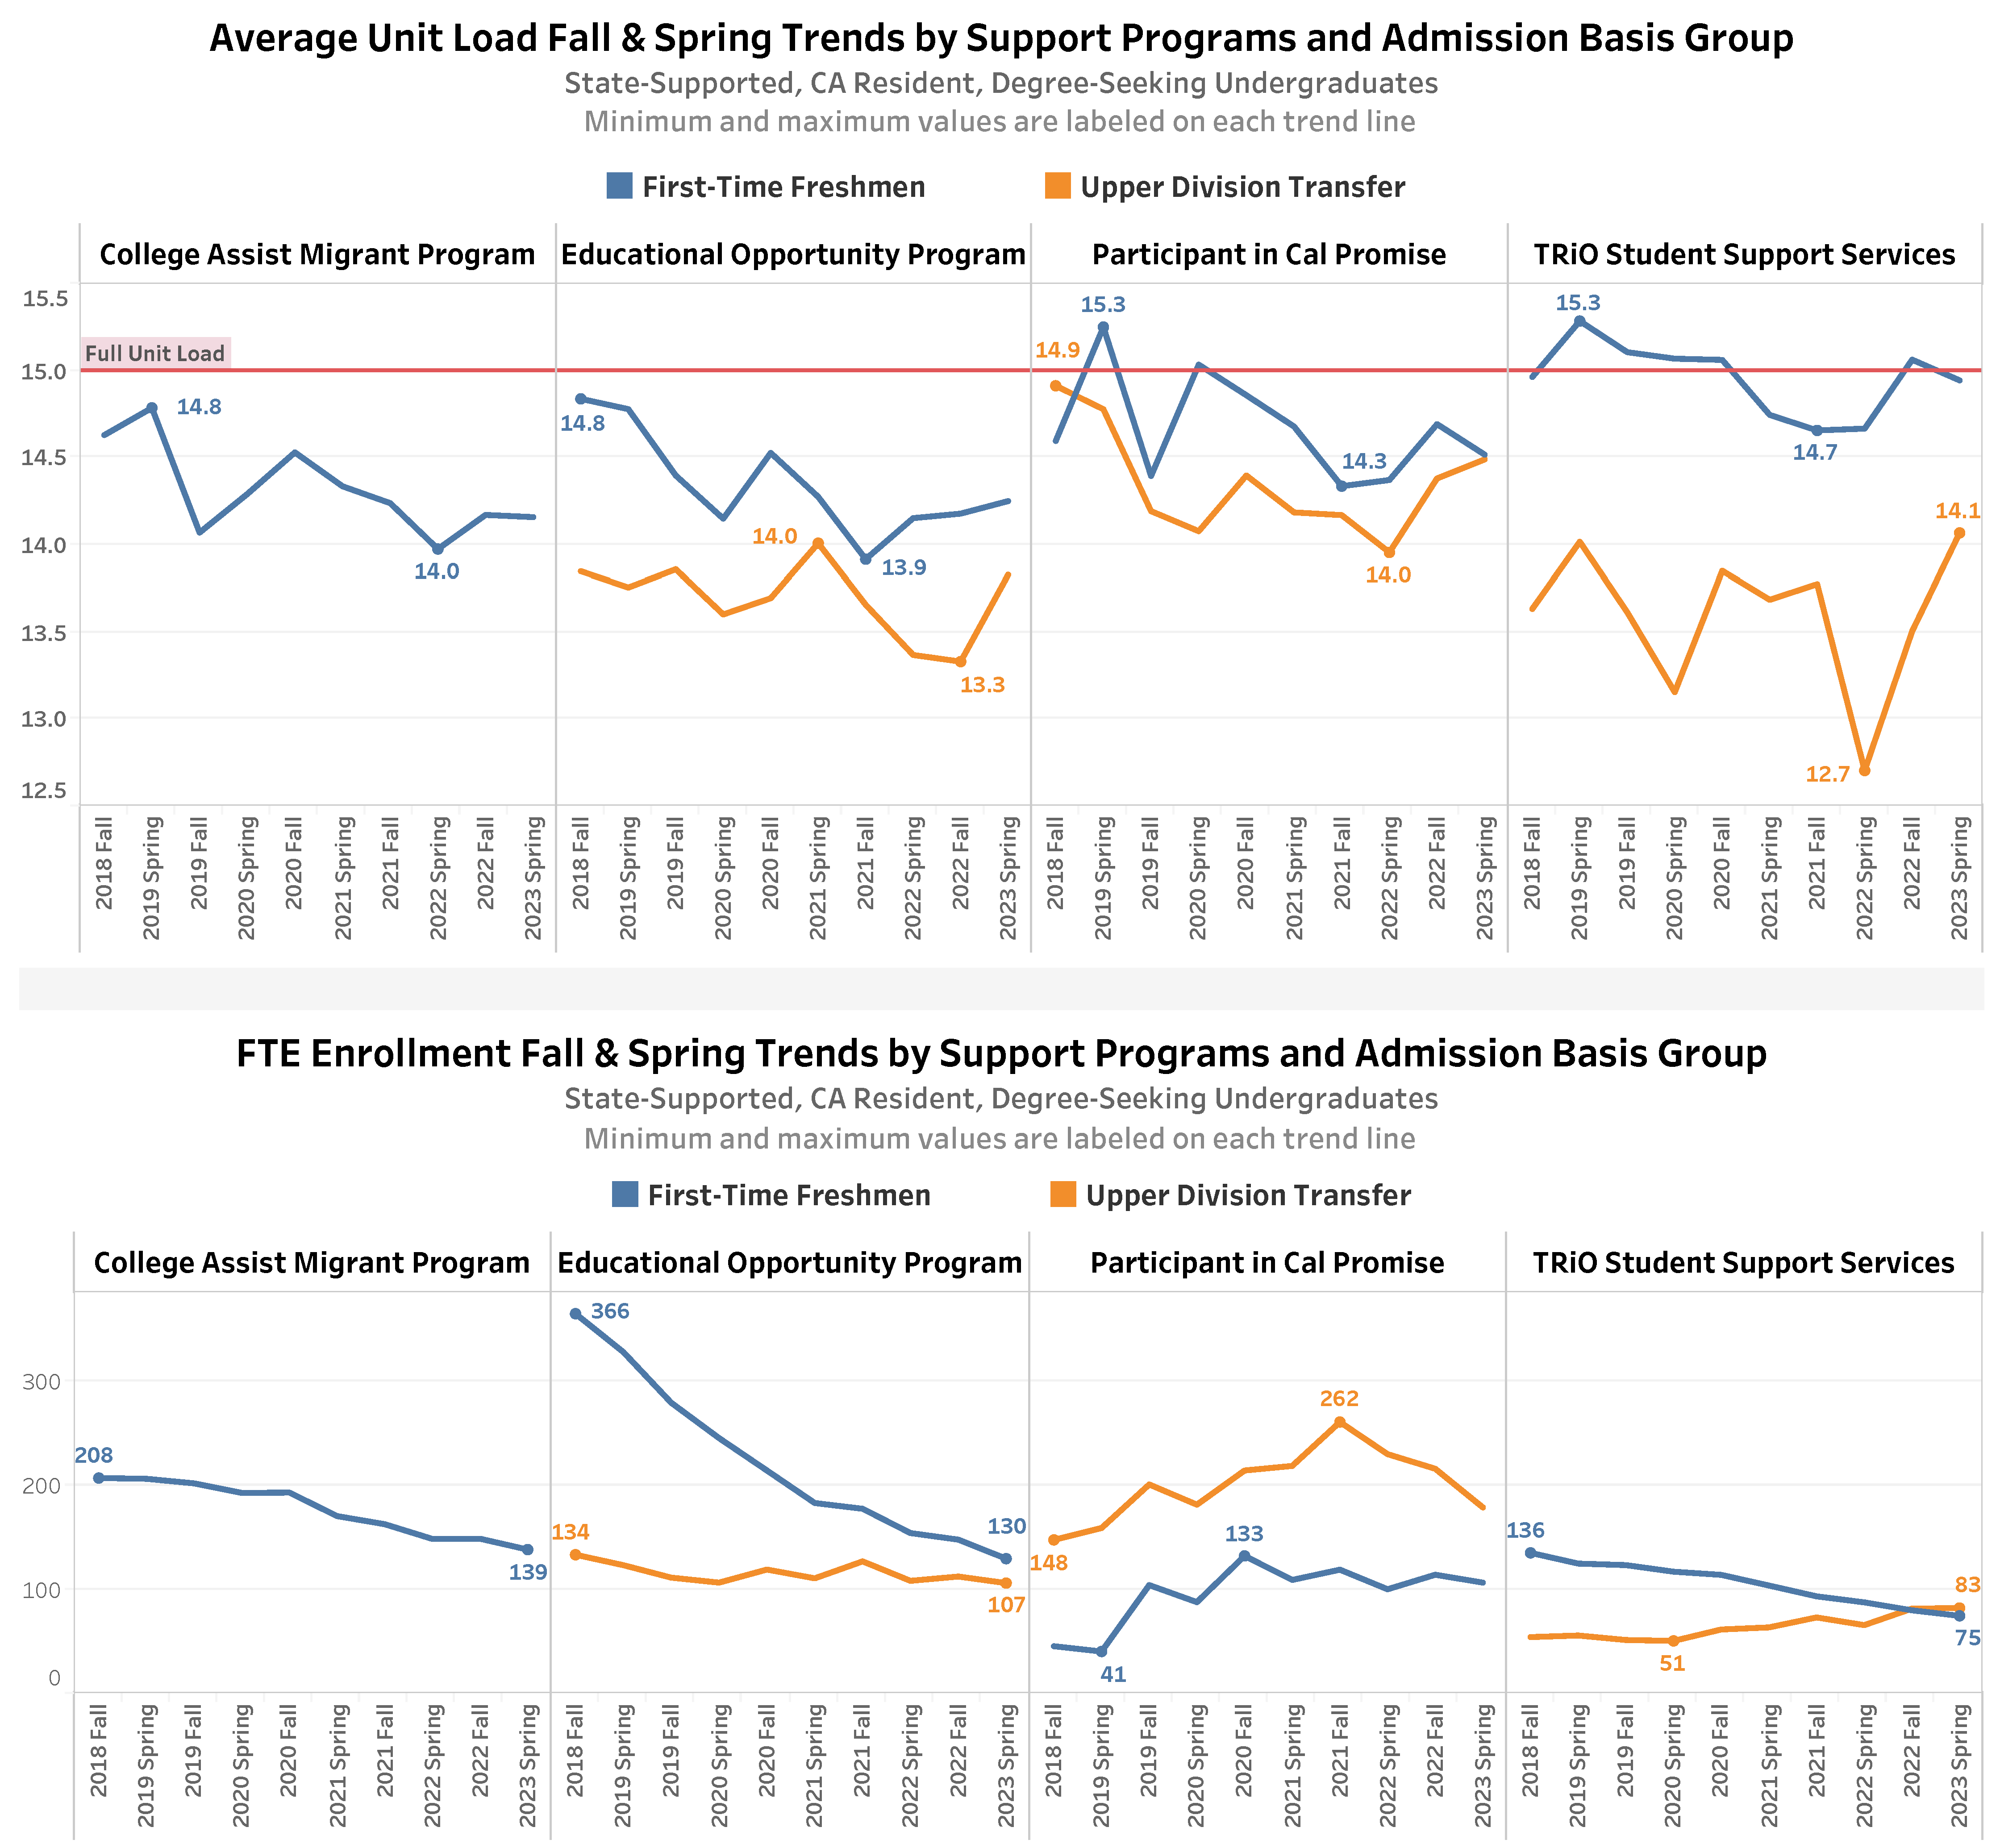 IAR Insights Spring 2023 - Average Unit Loads and FTEs by Support Programs and Admission Basis Group. See accessible data table.